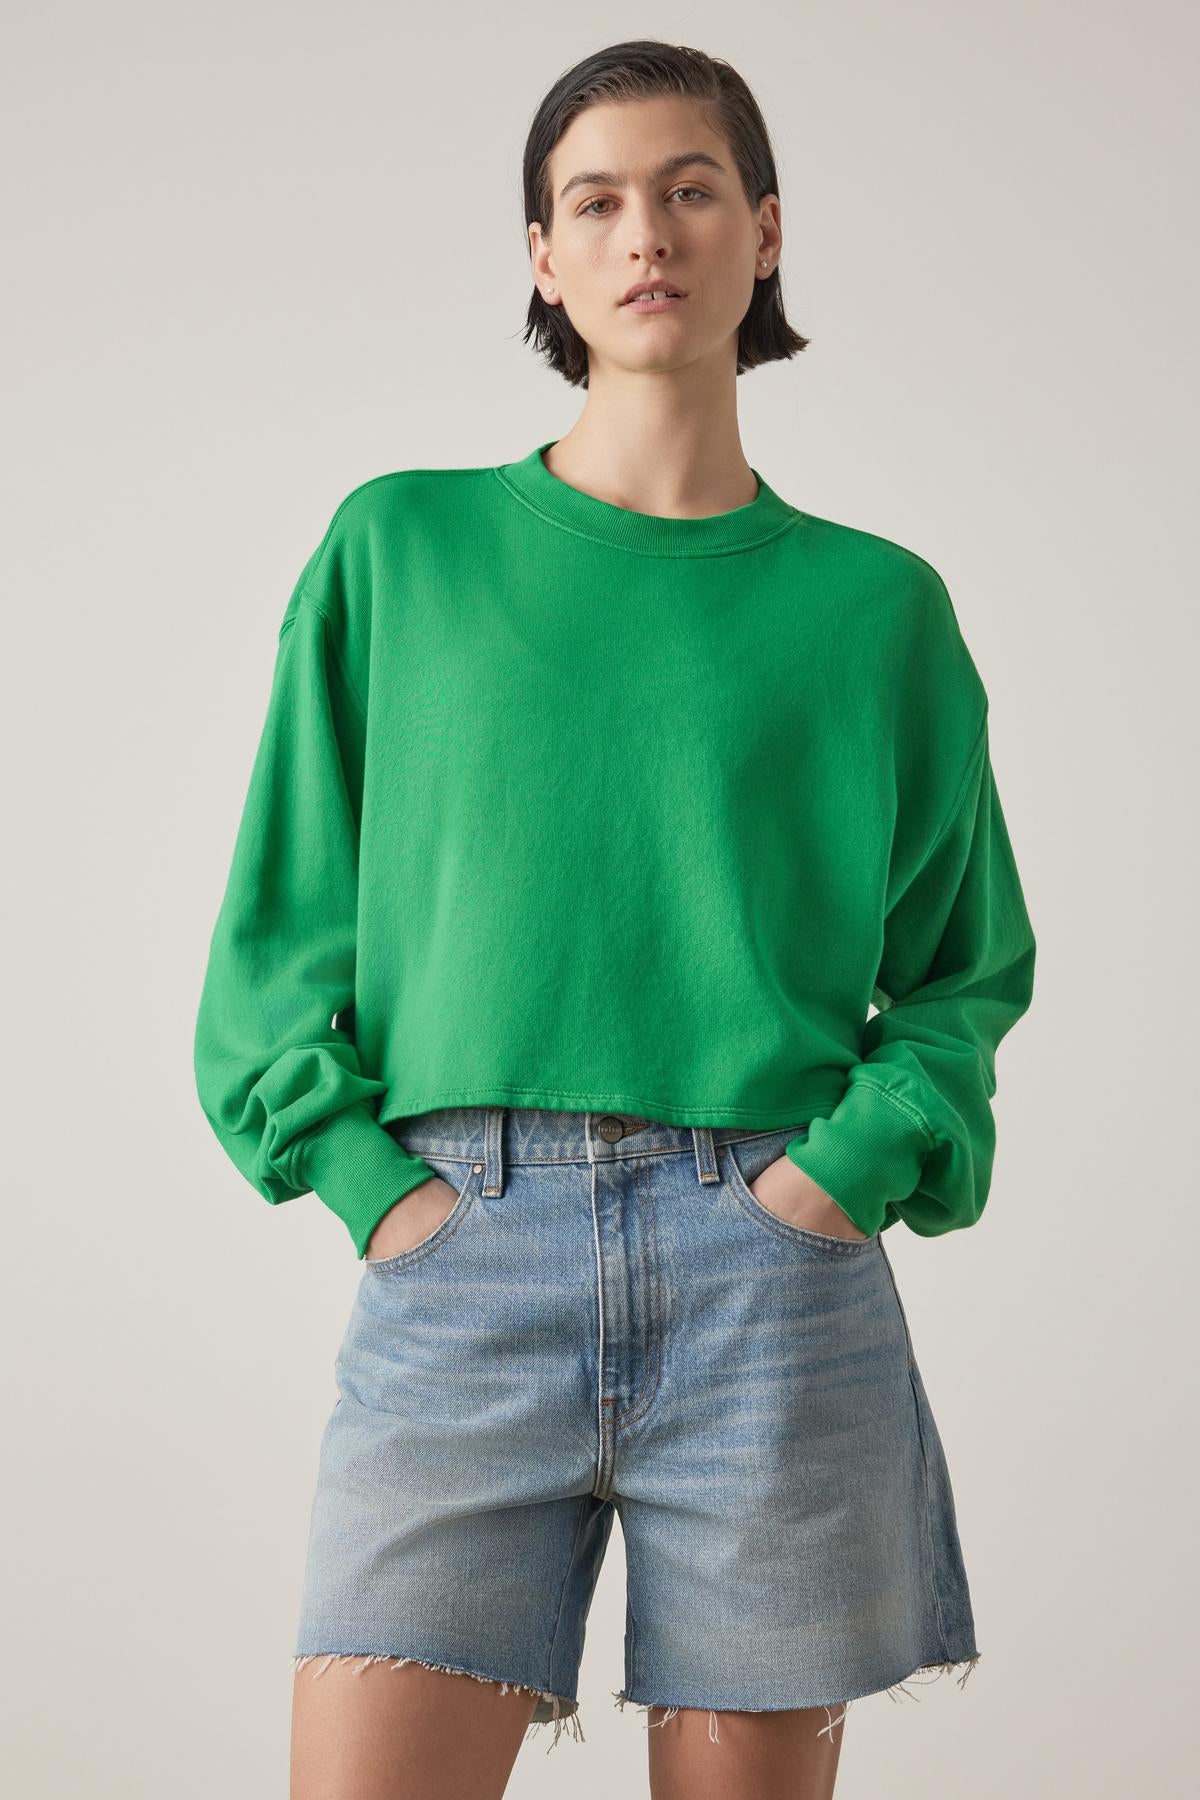 A person in a Velvet by Jenny Graham Malibu sweatshirt and blue denim shorts standing against a neutral background, hands on hips, looking at the camera.-36863304597697